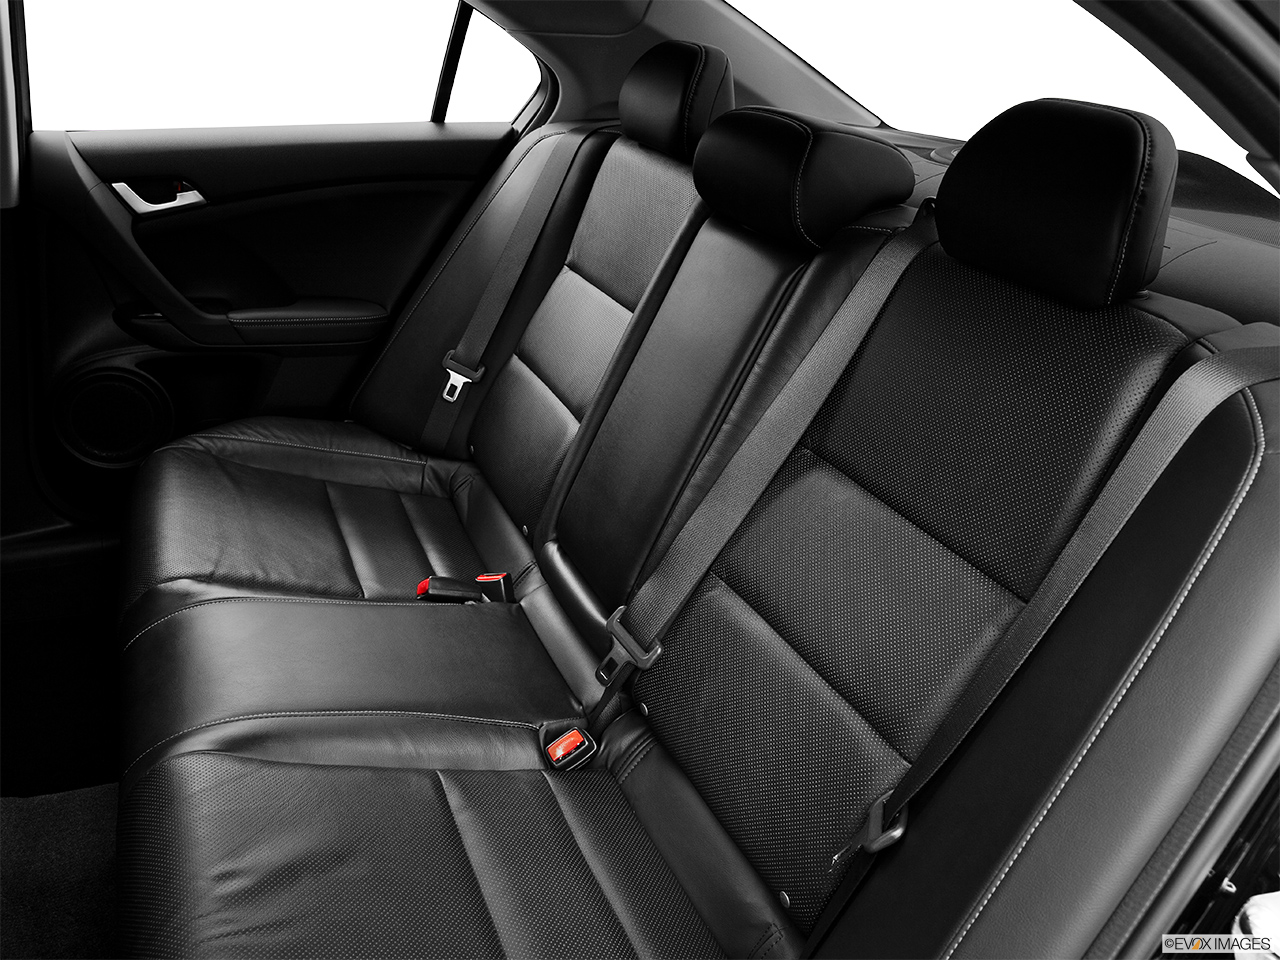 2014 Acura TSX 5-speed Automatic Rear seats from Drivers Side. 